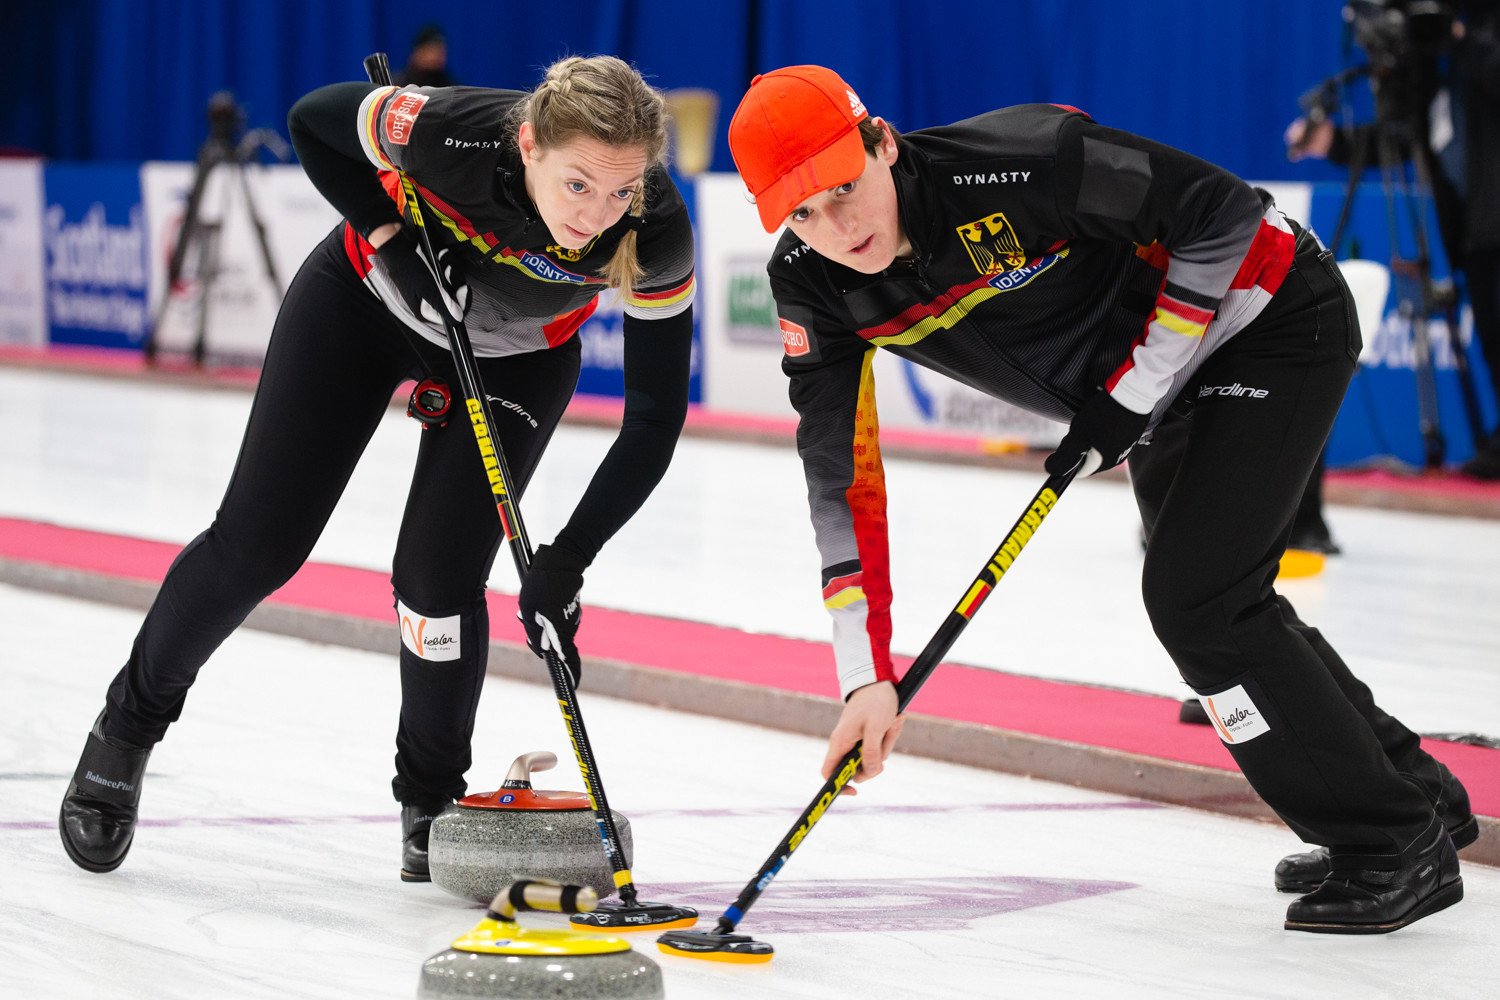 Sweden remain as only undefeated nation at World Mixed Doubles Curling Championship